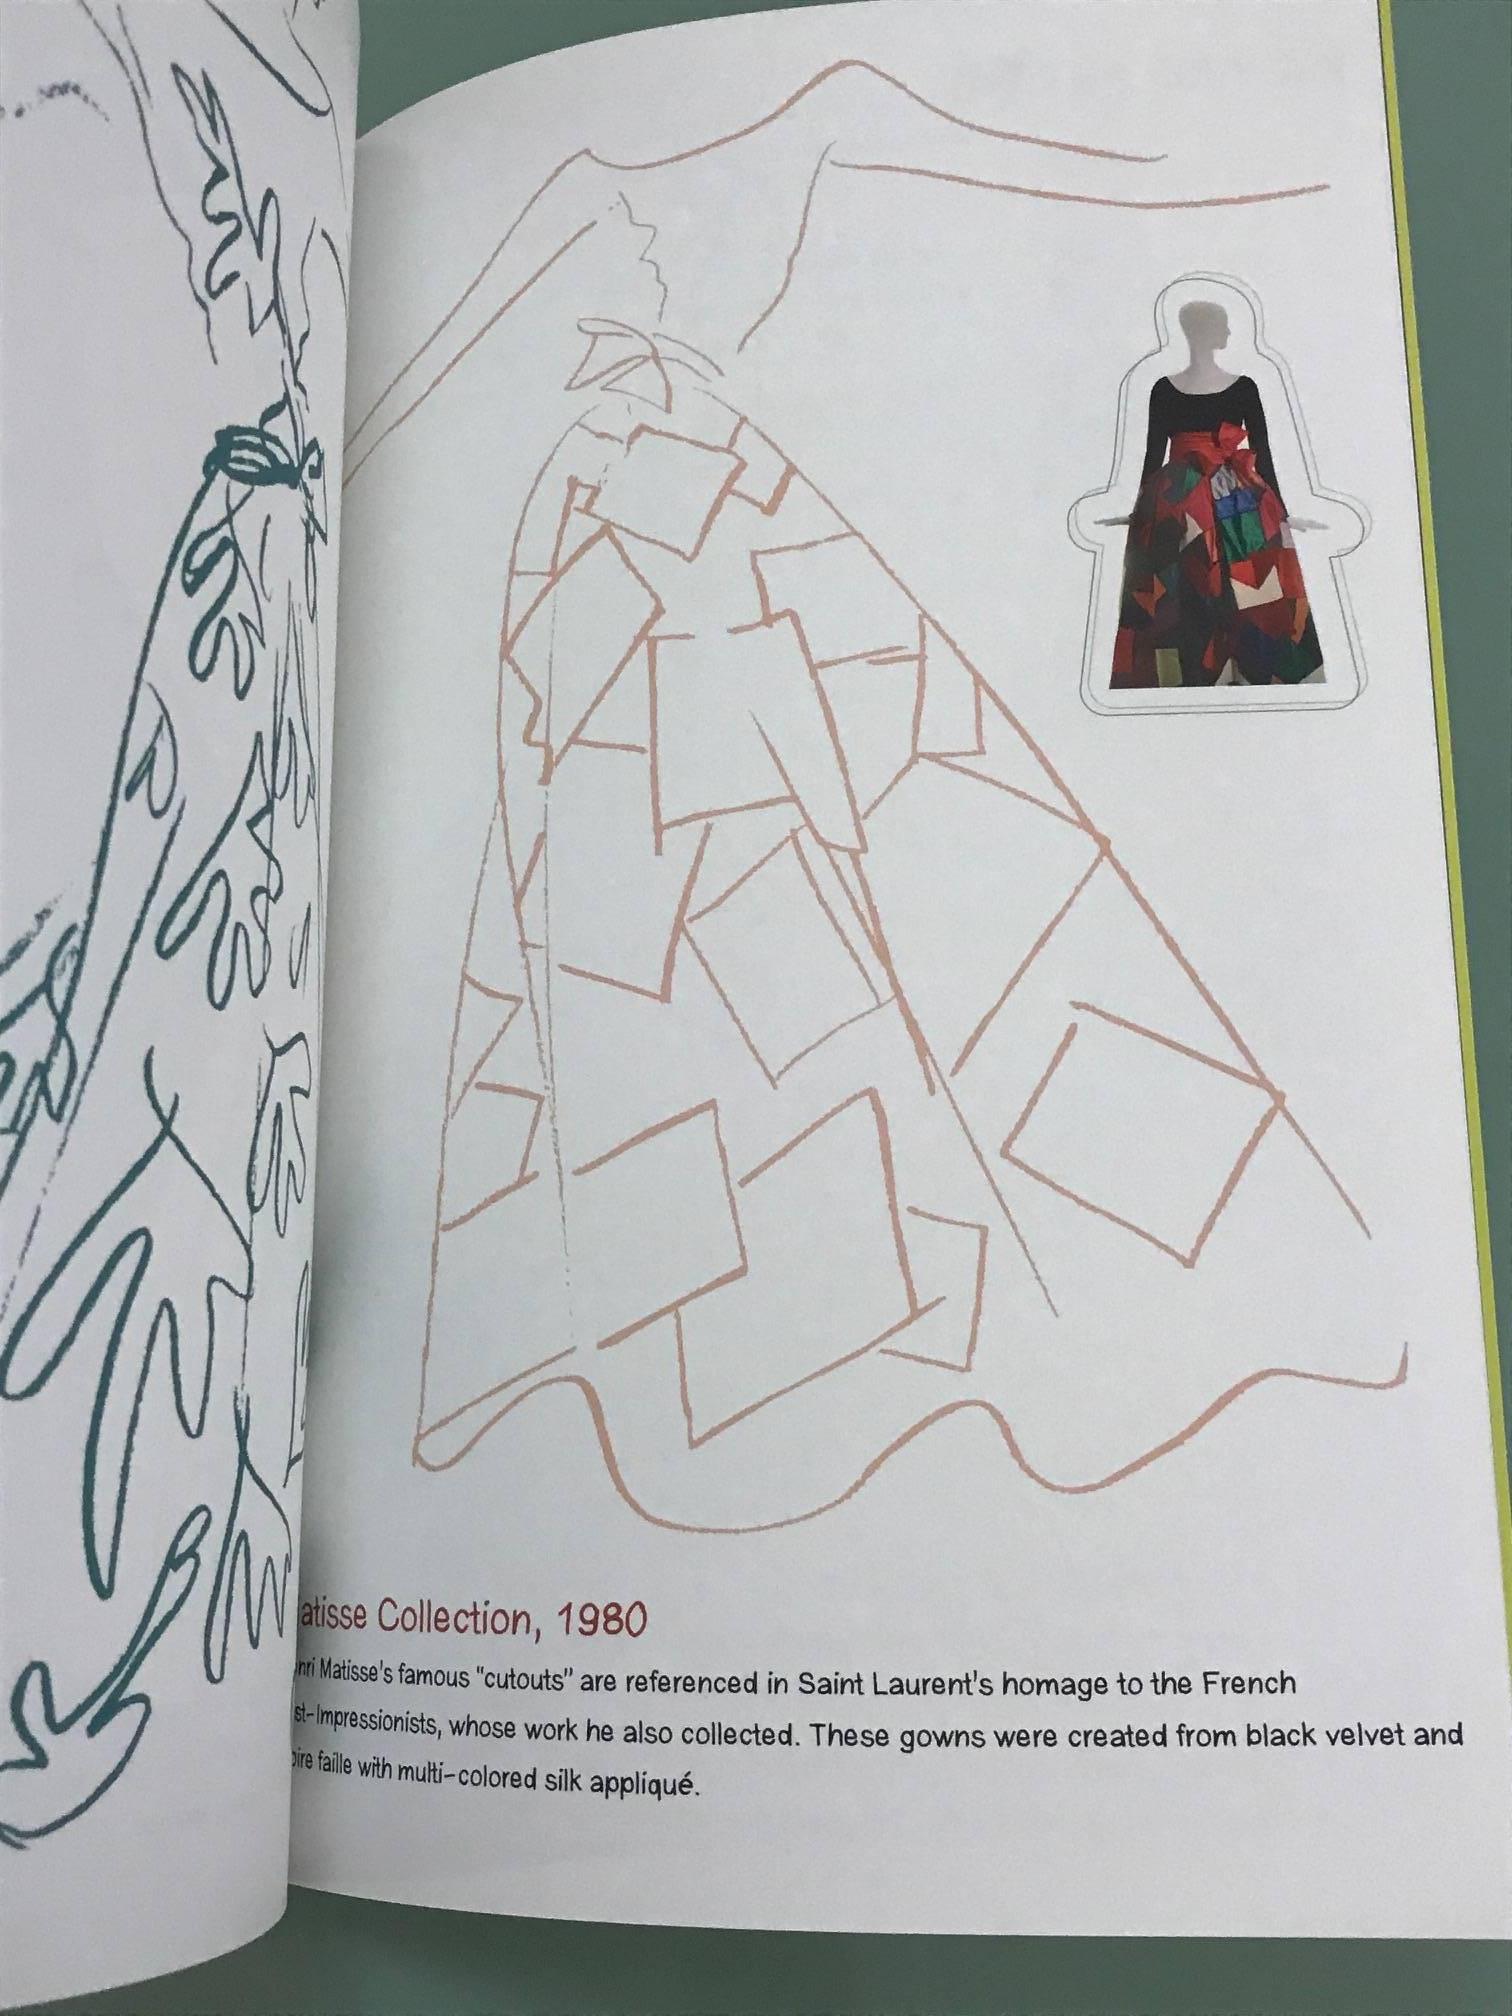 Yves Saint Laurent handcrafted coloring book from Neiman Marcus. A fun trip through some of Saint Laurent's most iconic designs, including some previously unpublished images. Bound in gold Saffiano leather. 

Approximately 12